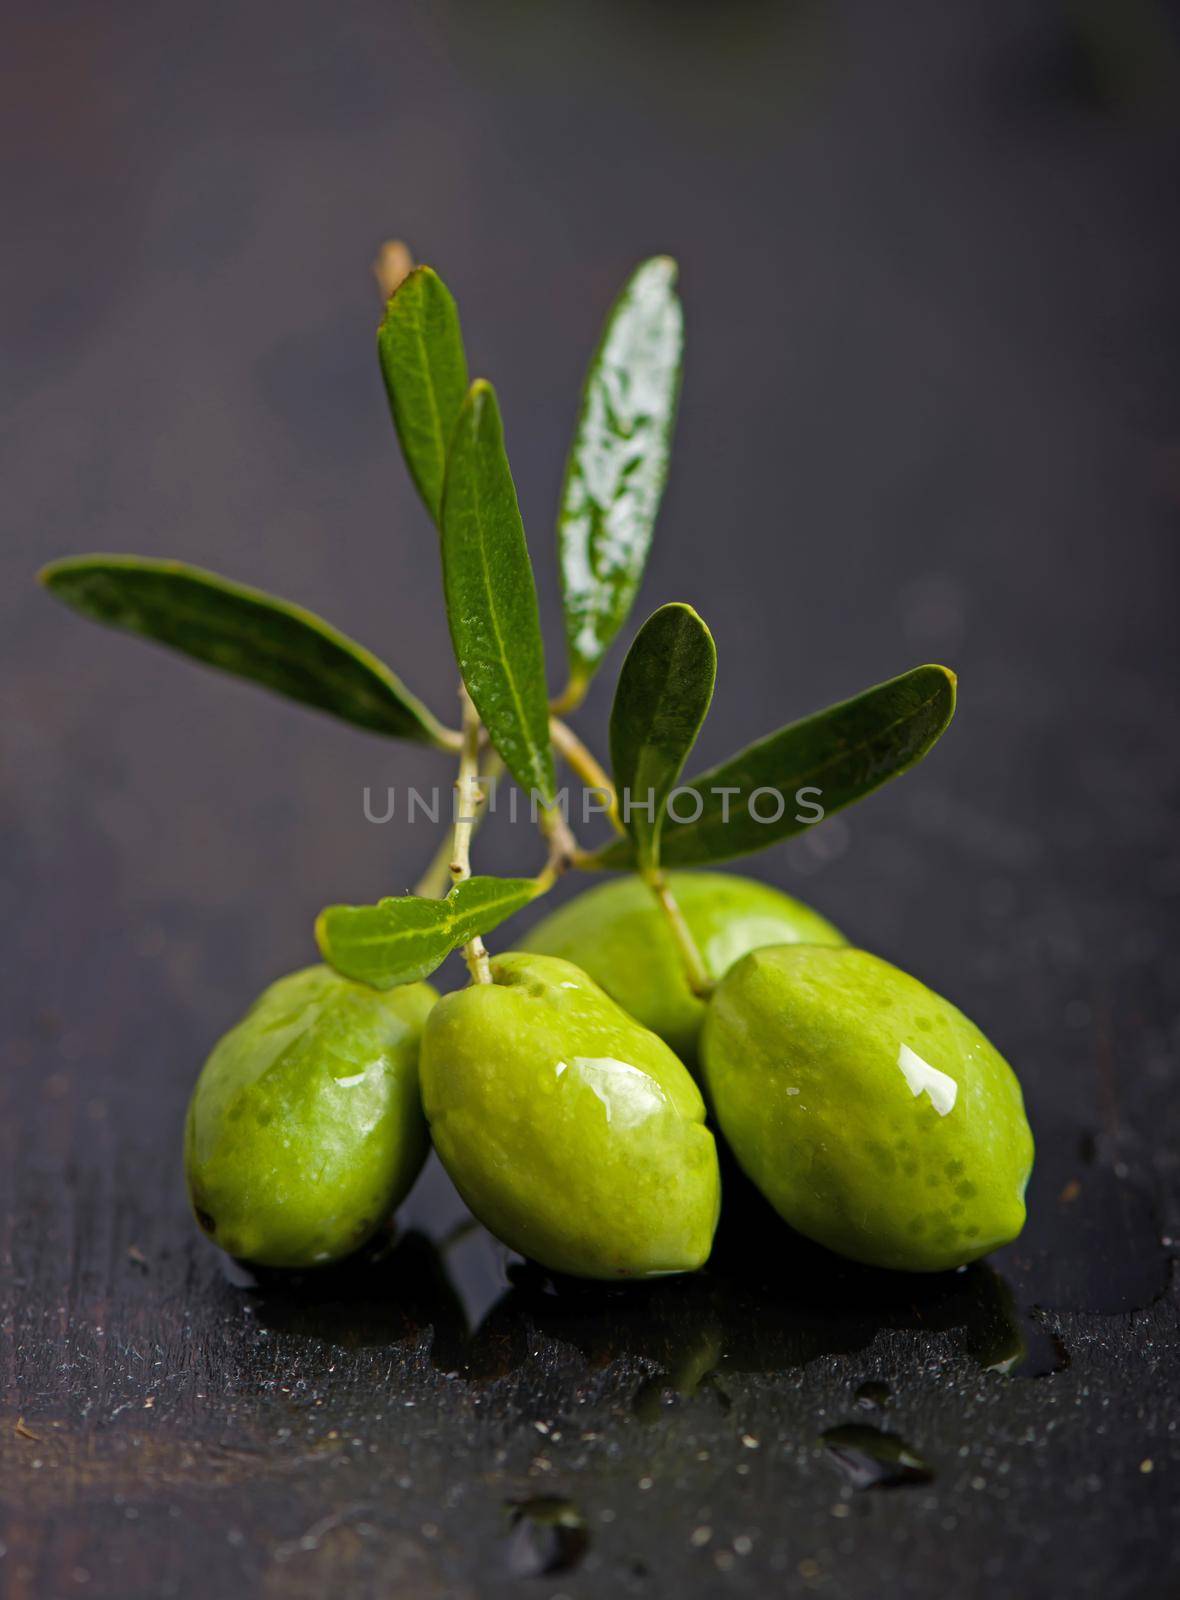 Olive oil and olive branch on the black background